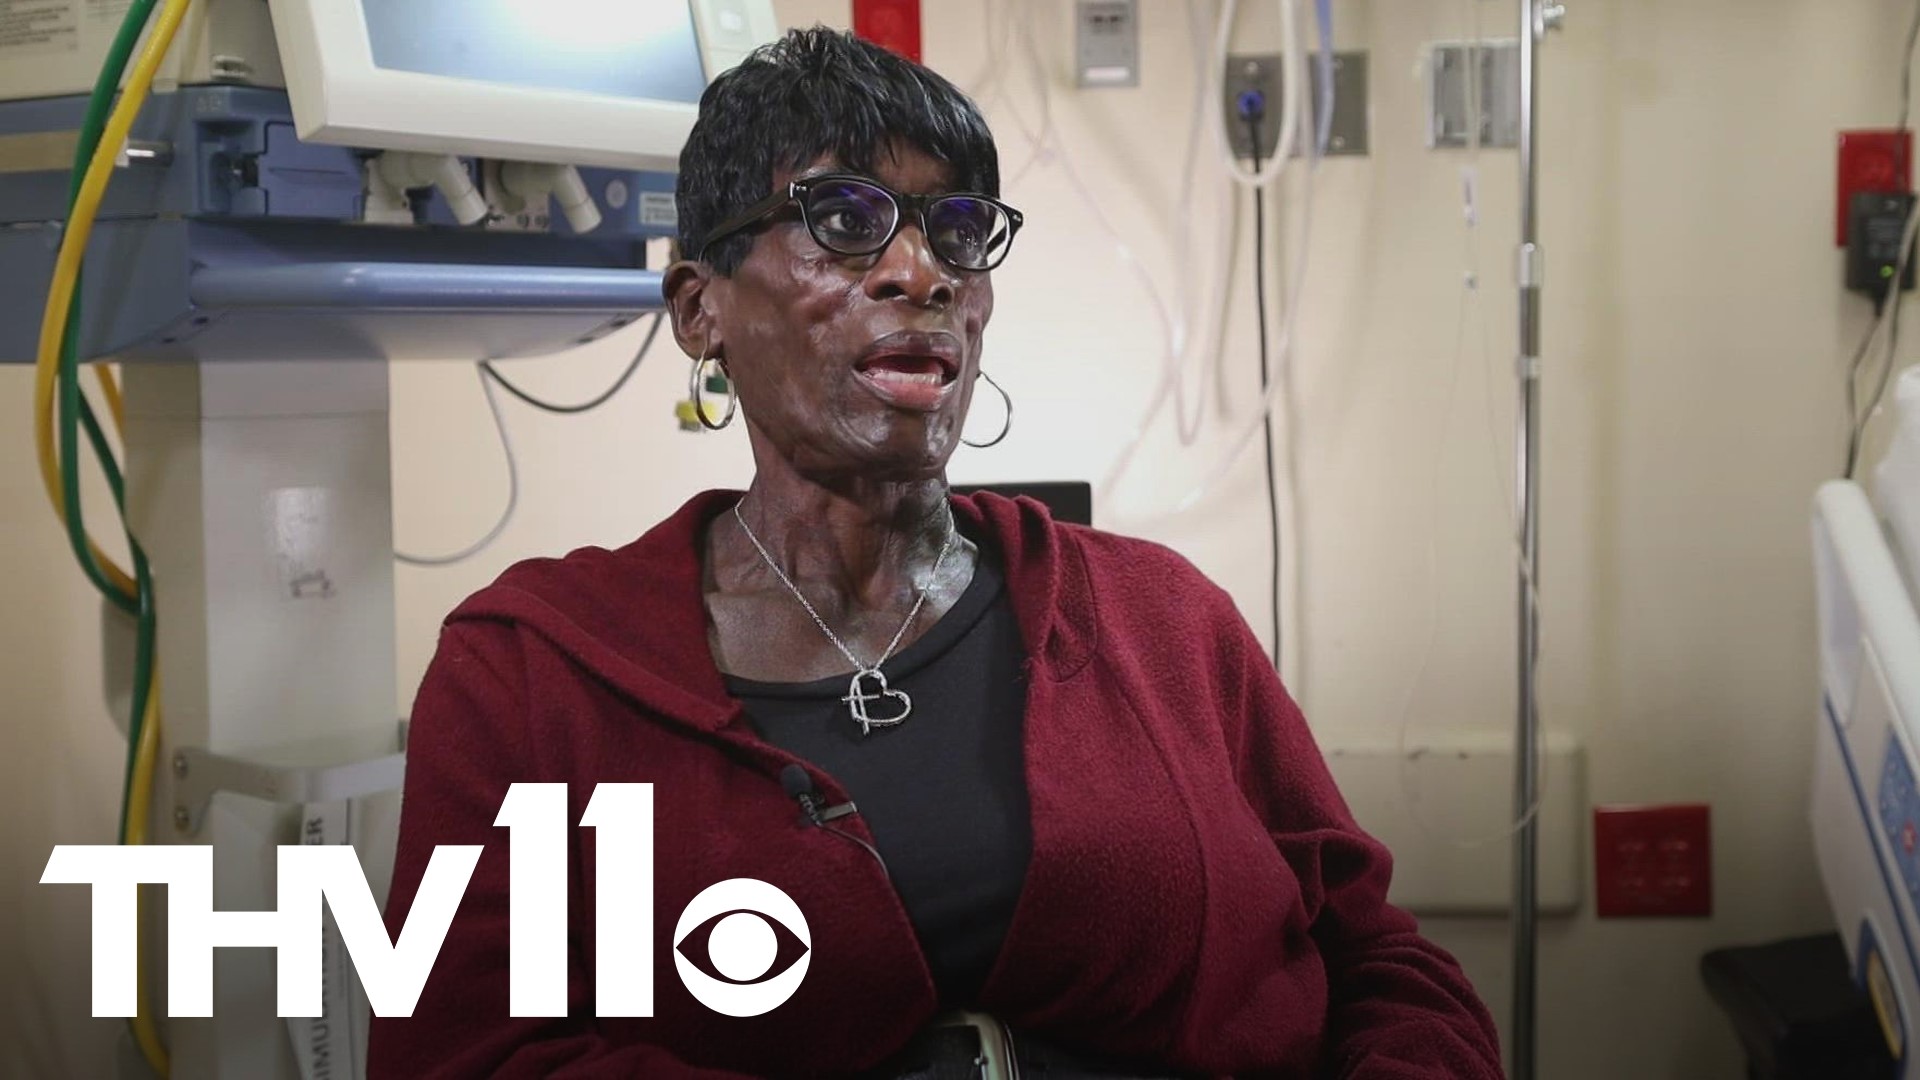 Rosie Coleman had no idea she had serious heart issues until she found herself in the ER, but thanks to an innovative surgery she is thankful to stay heart healthy.